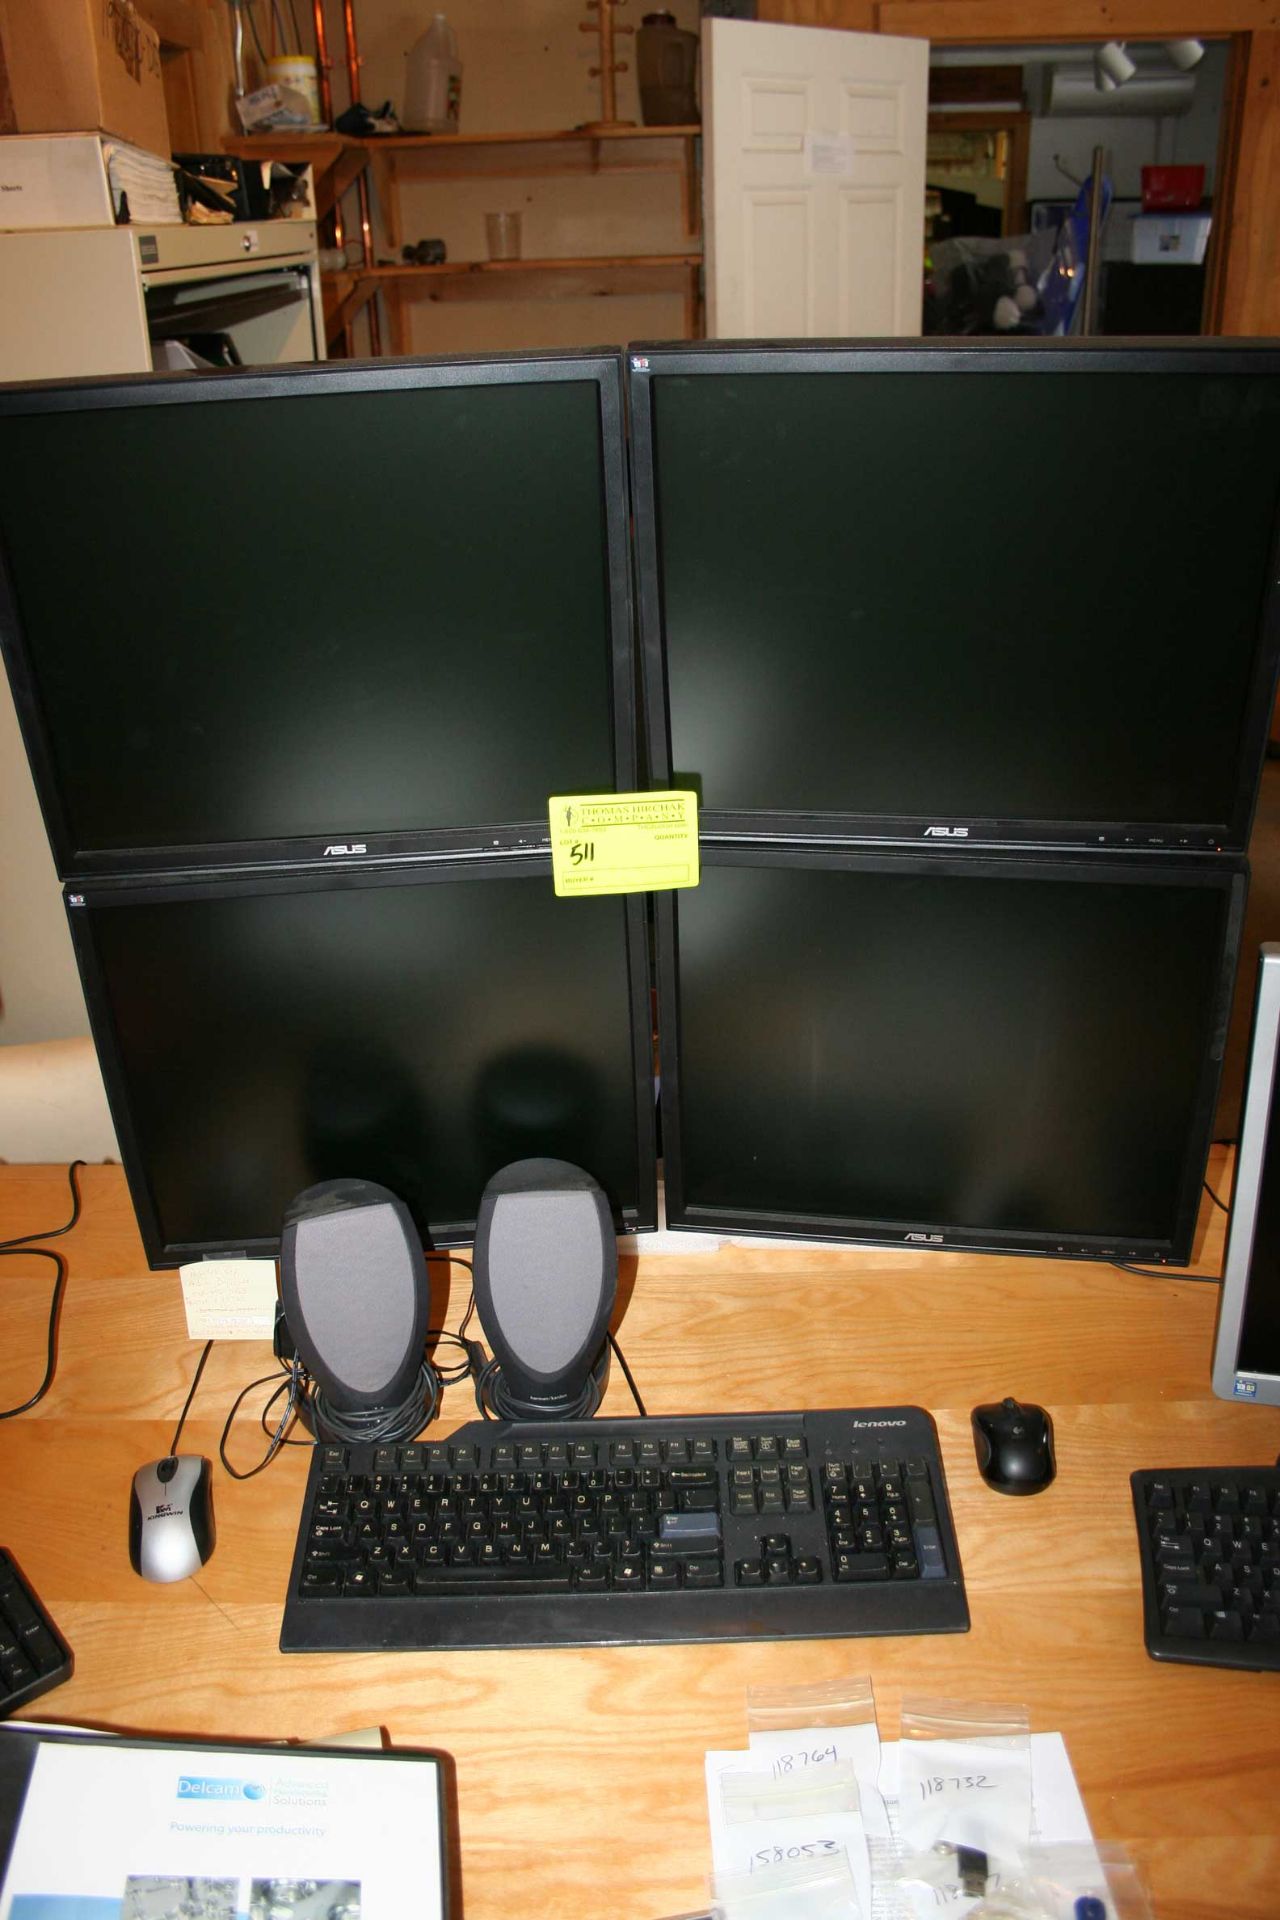 Dell Precision 690 PC w/ (4) Asus 19" monitors on 4-monitor display, keyboard, mouse, speakers